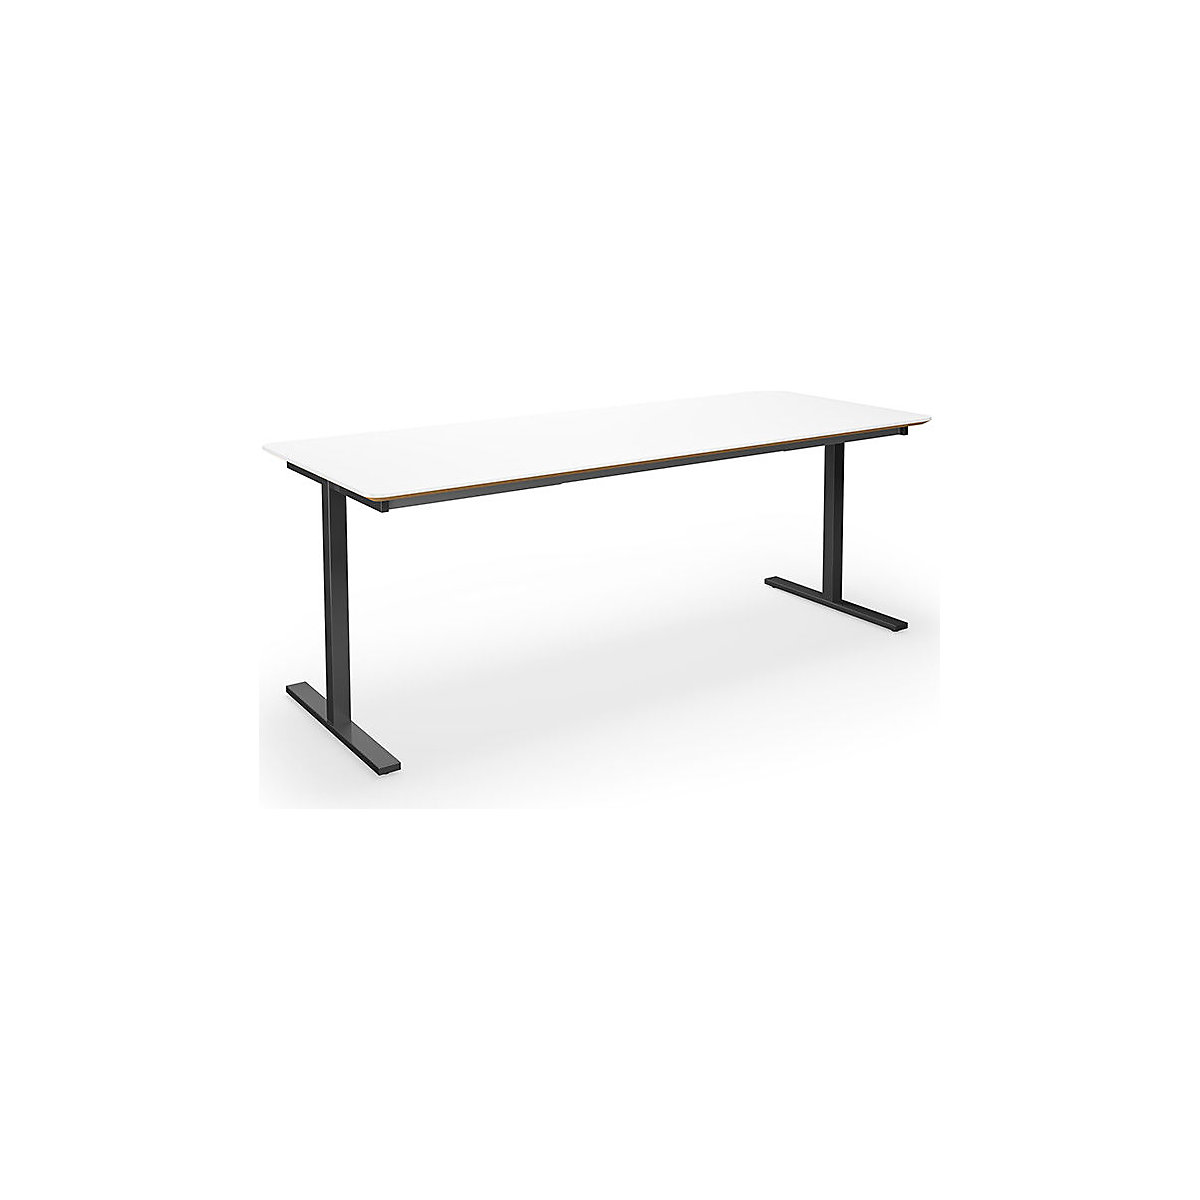 DUO-T Trend multi-purpose desk, straight tabletop, rounded corners, WxD 2000 x 800 mm, white, black-4